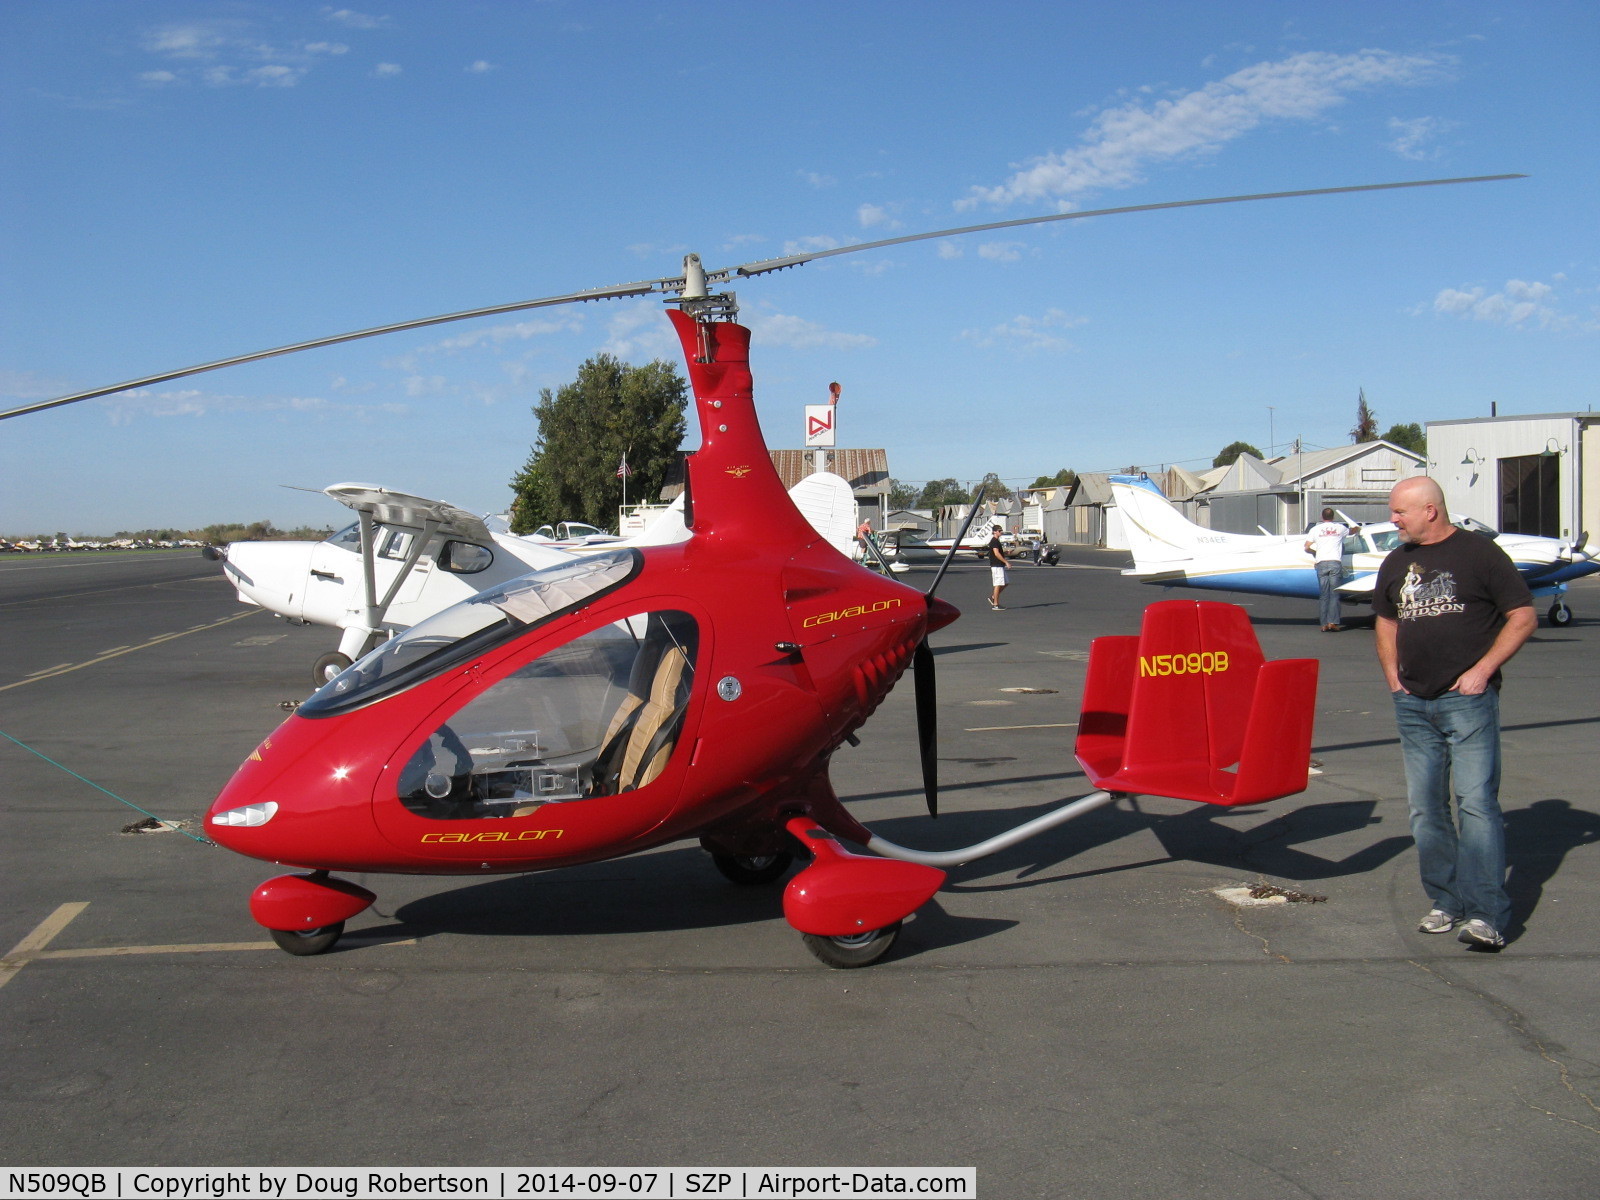 N509QB, 2014 AutoGyro Cavalon C/N V00138, 2014 Burton Autogyro Gmbh CAVALON, Rotax 914UL Turbocharged 93.3 Hp, 3-blade pusher FP prop, two blade rotor of extruded aluminum via gear-reduction drive. Quite a rare attraction with the SZP Air Museum crowd.